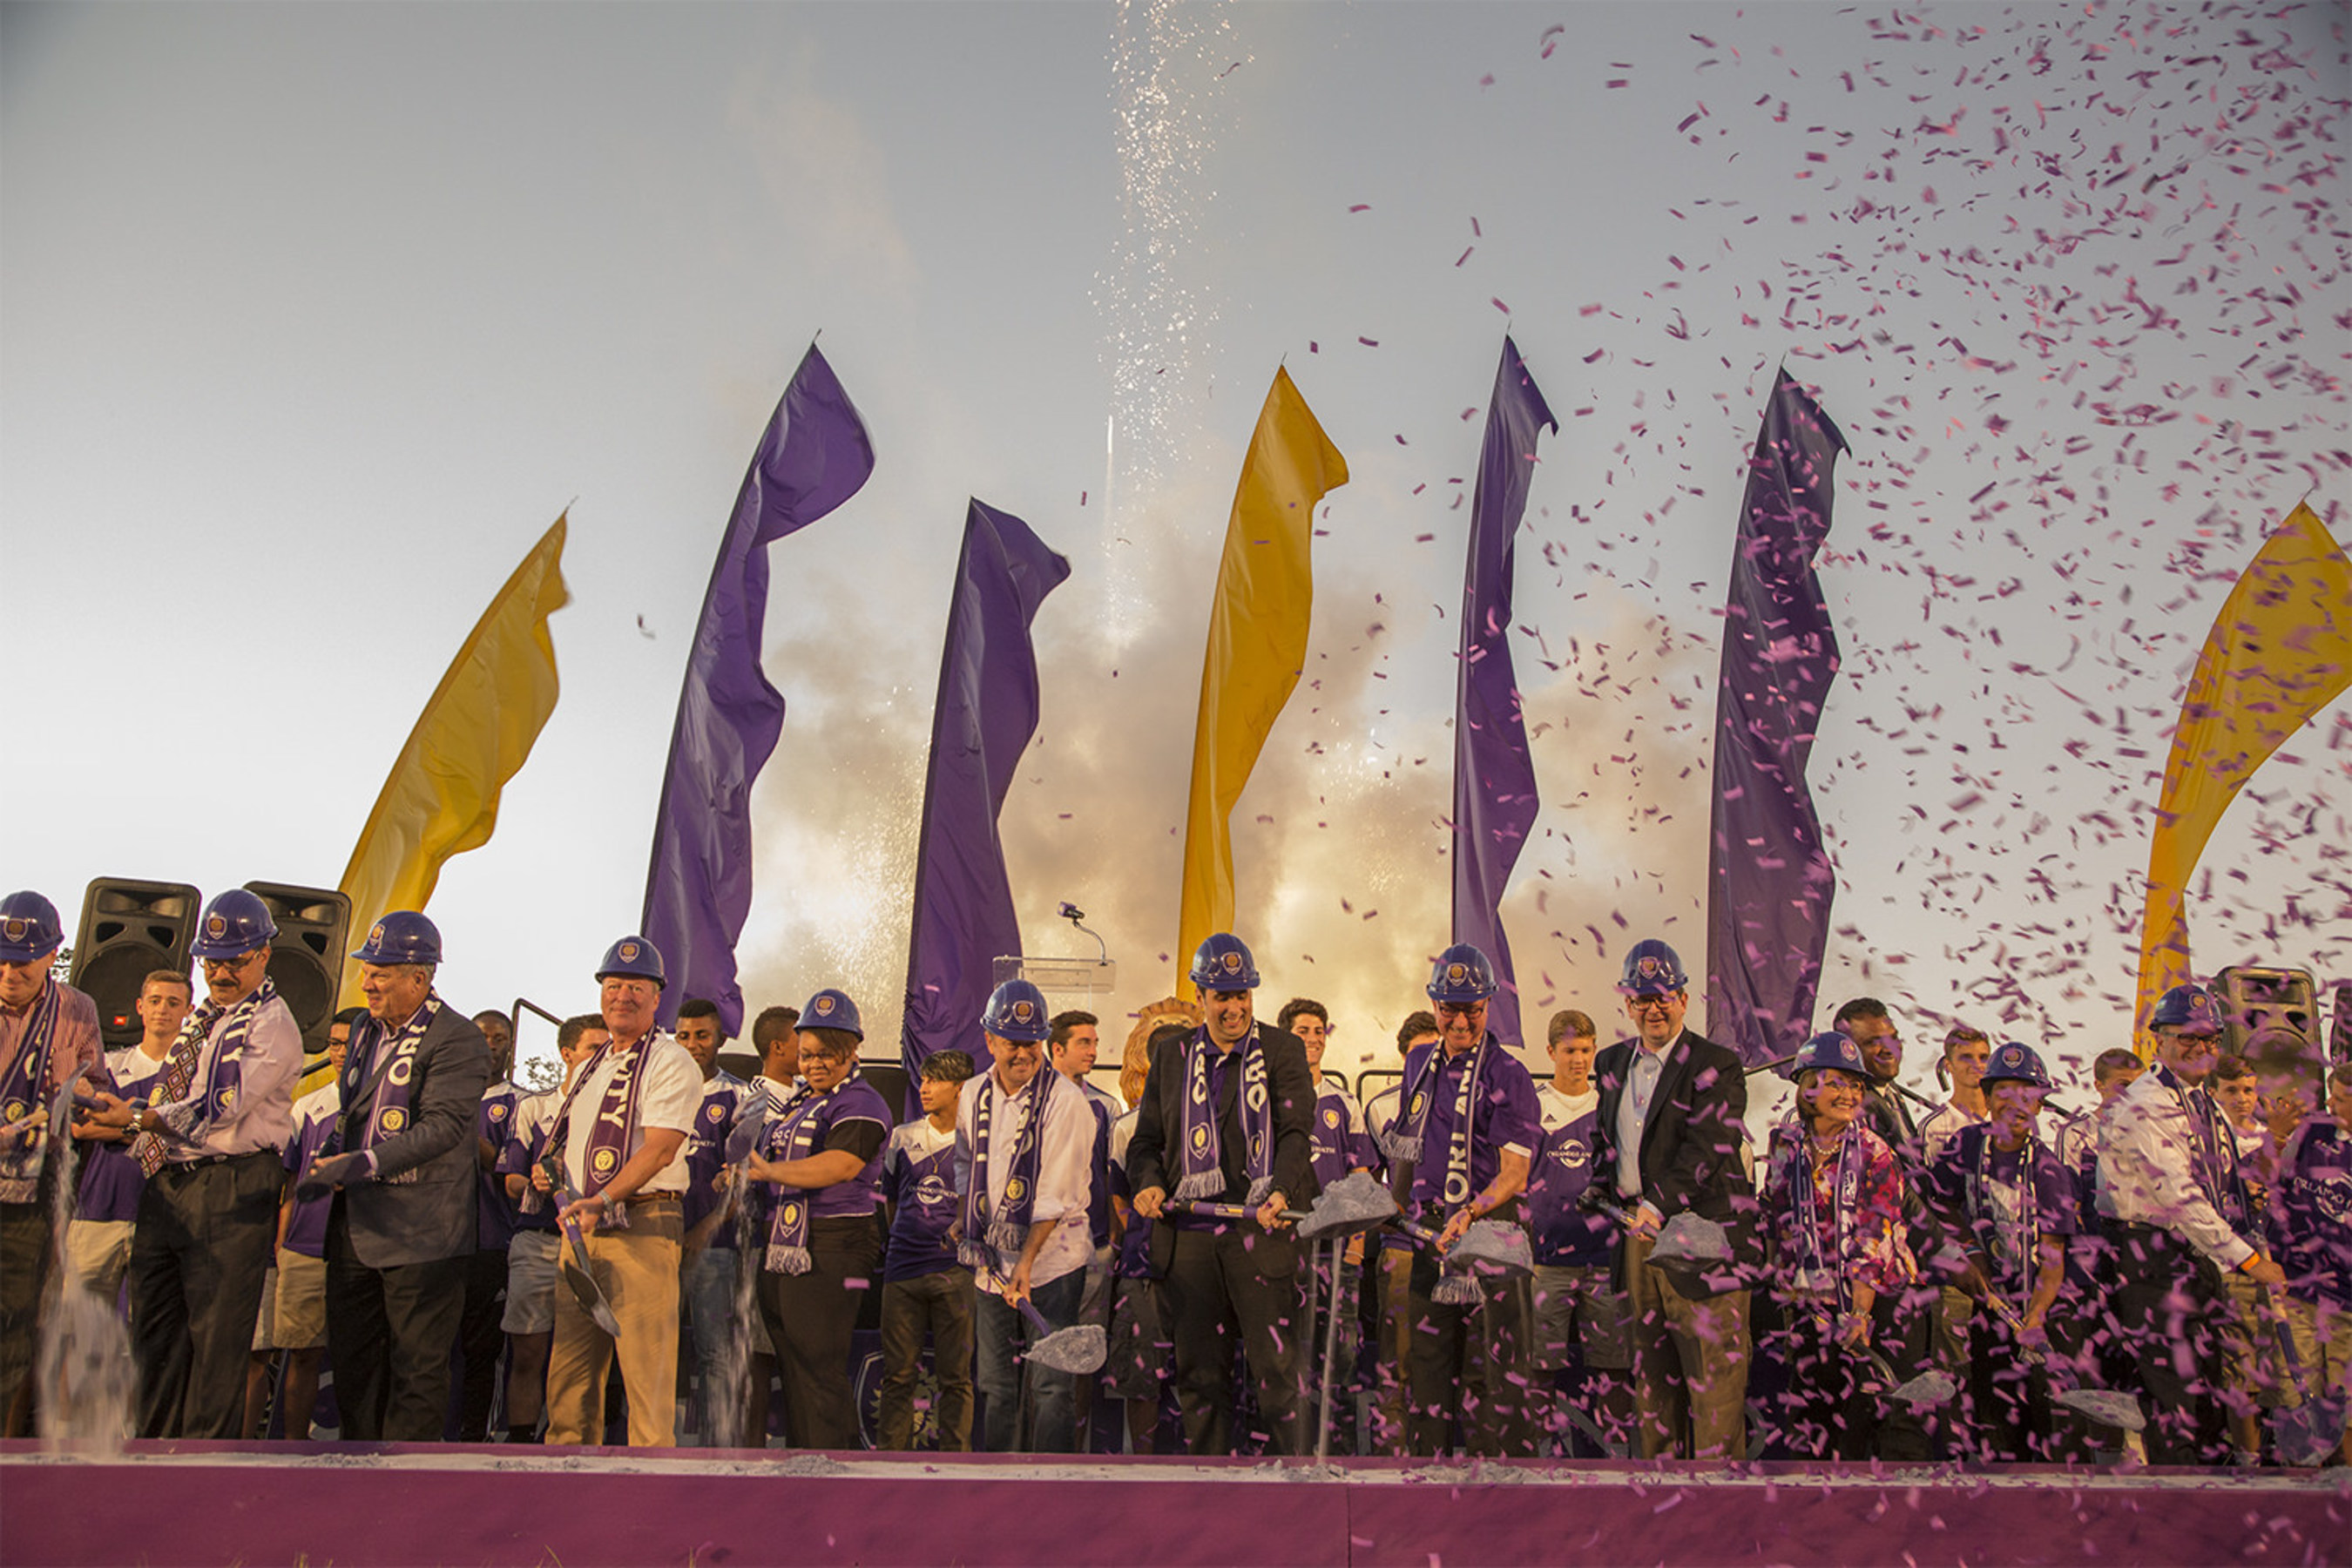 Orlando City SC breaks ground on its new Major League Soccer Stadium in the heart of downtown Orlando.